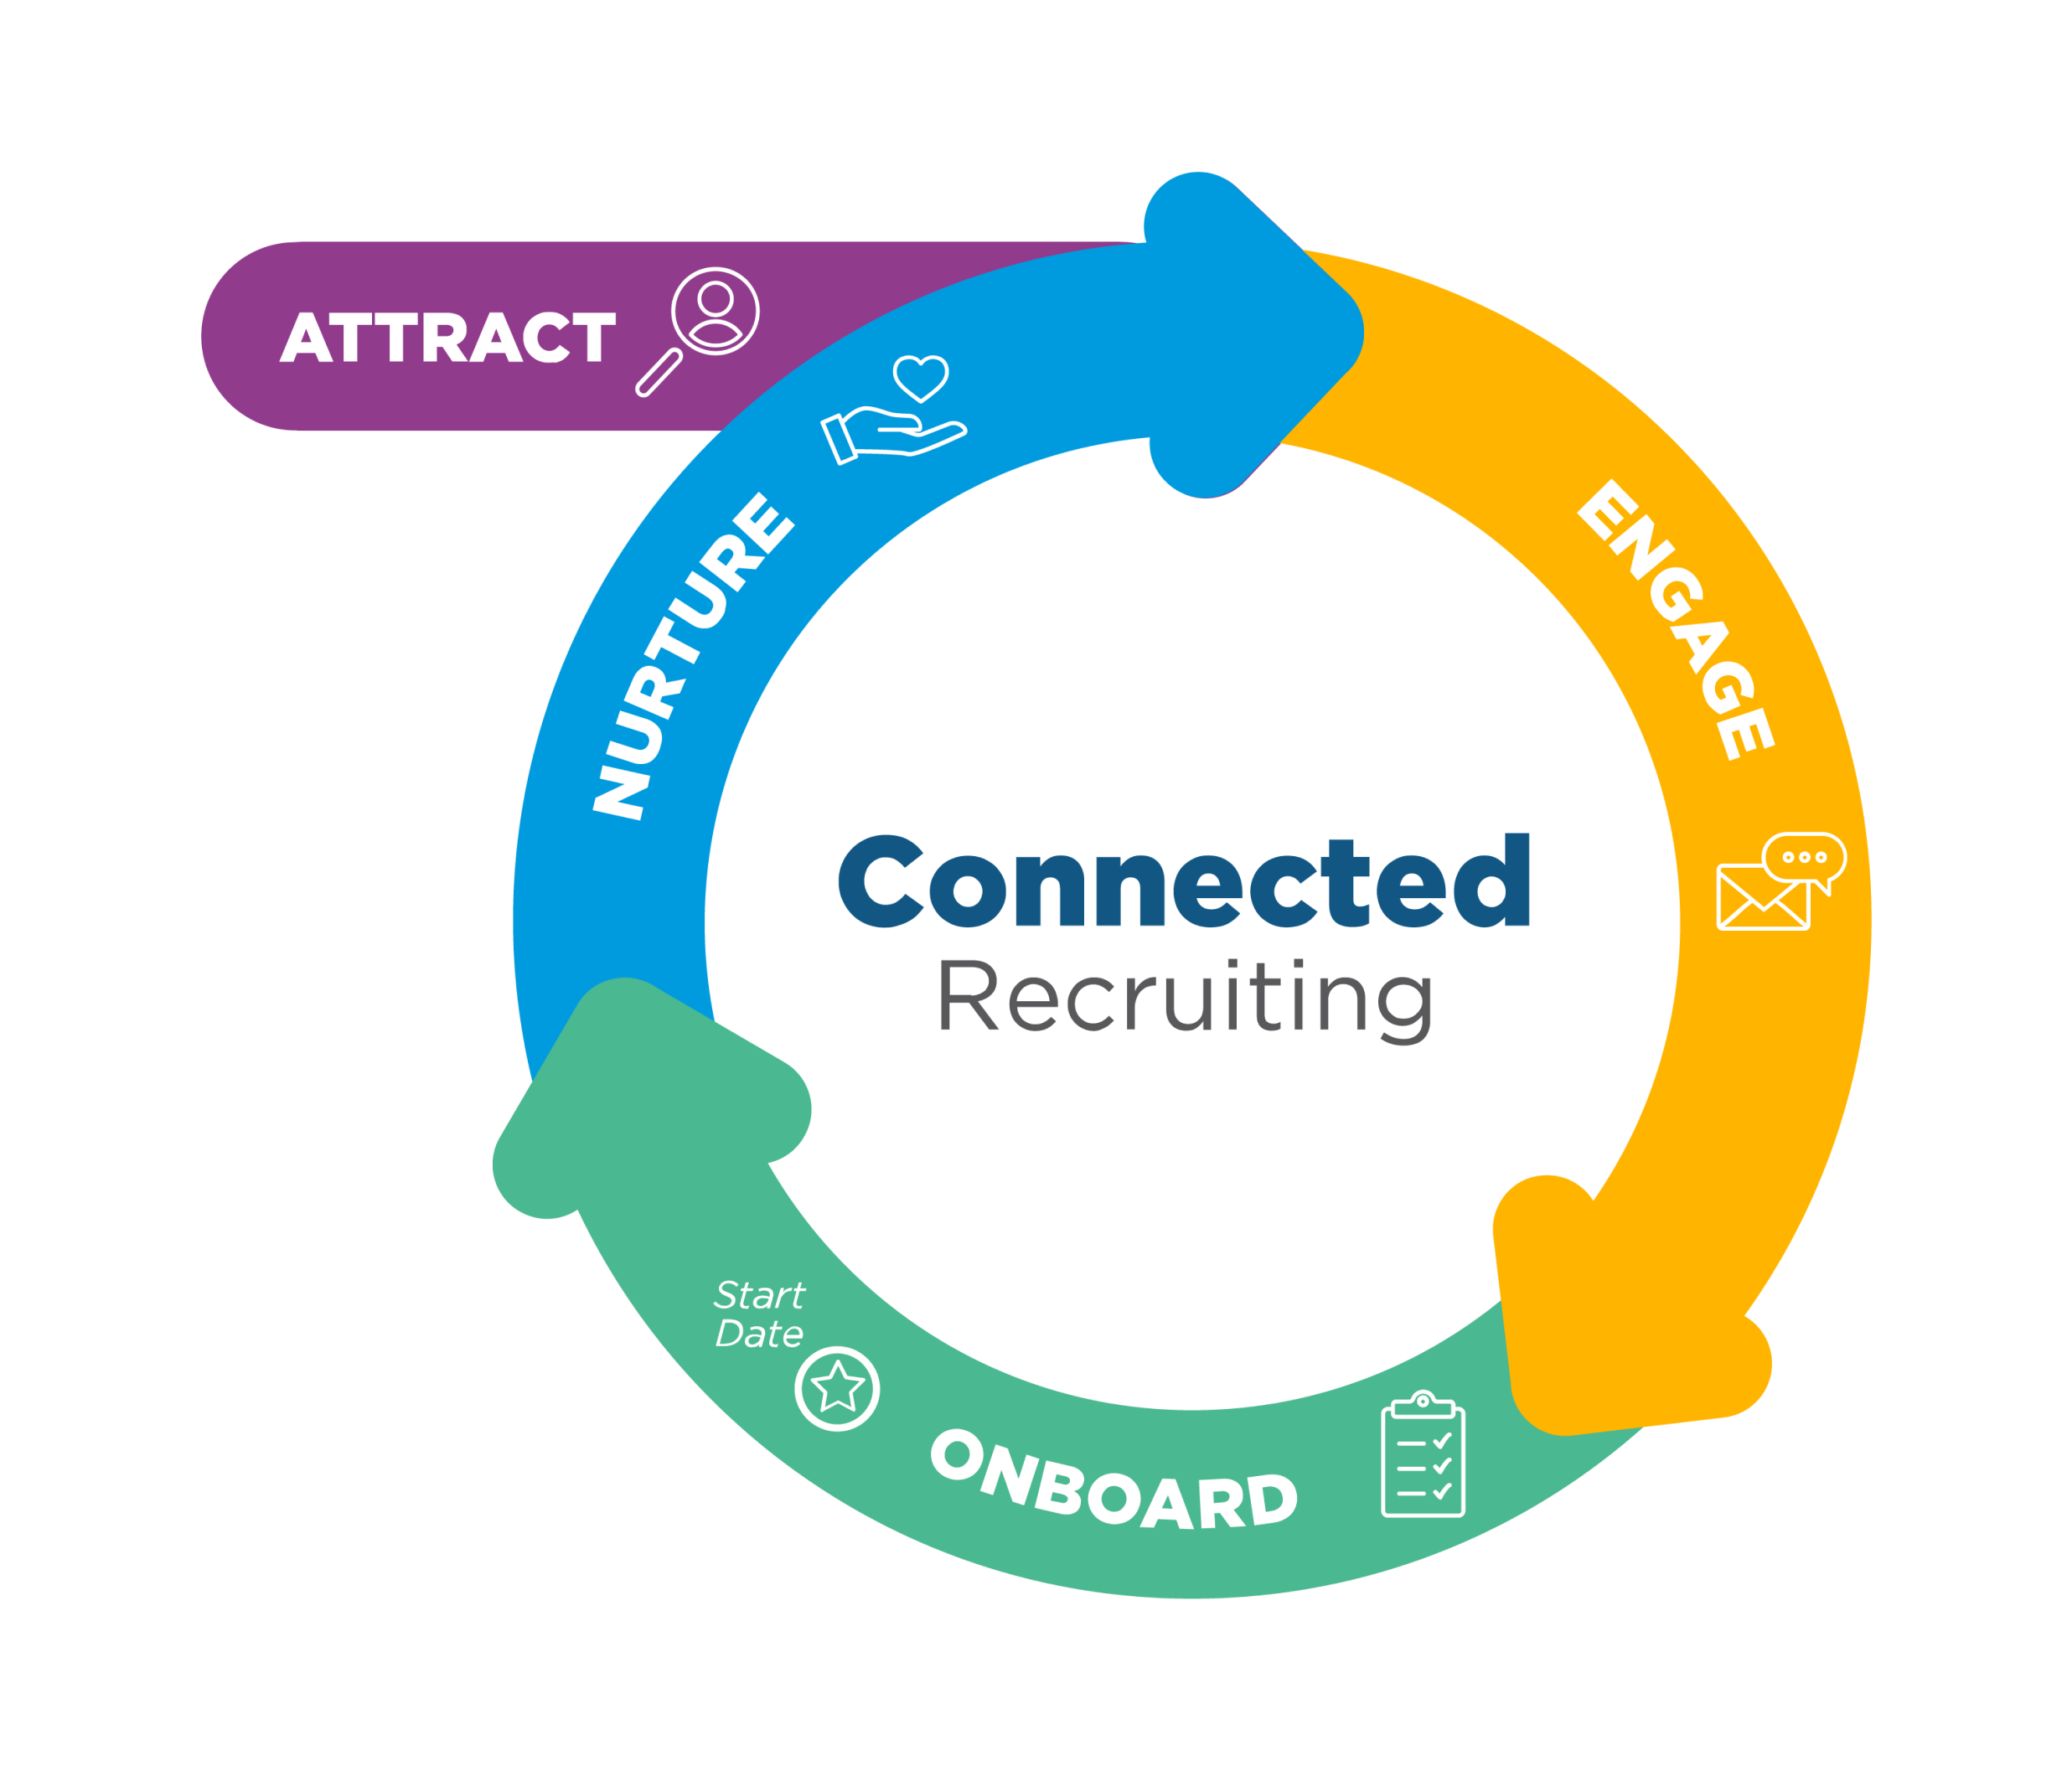 Connected Recruiting Lifecycle